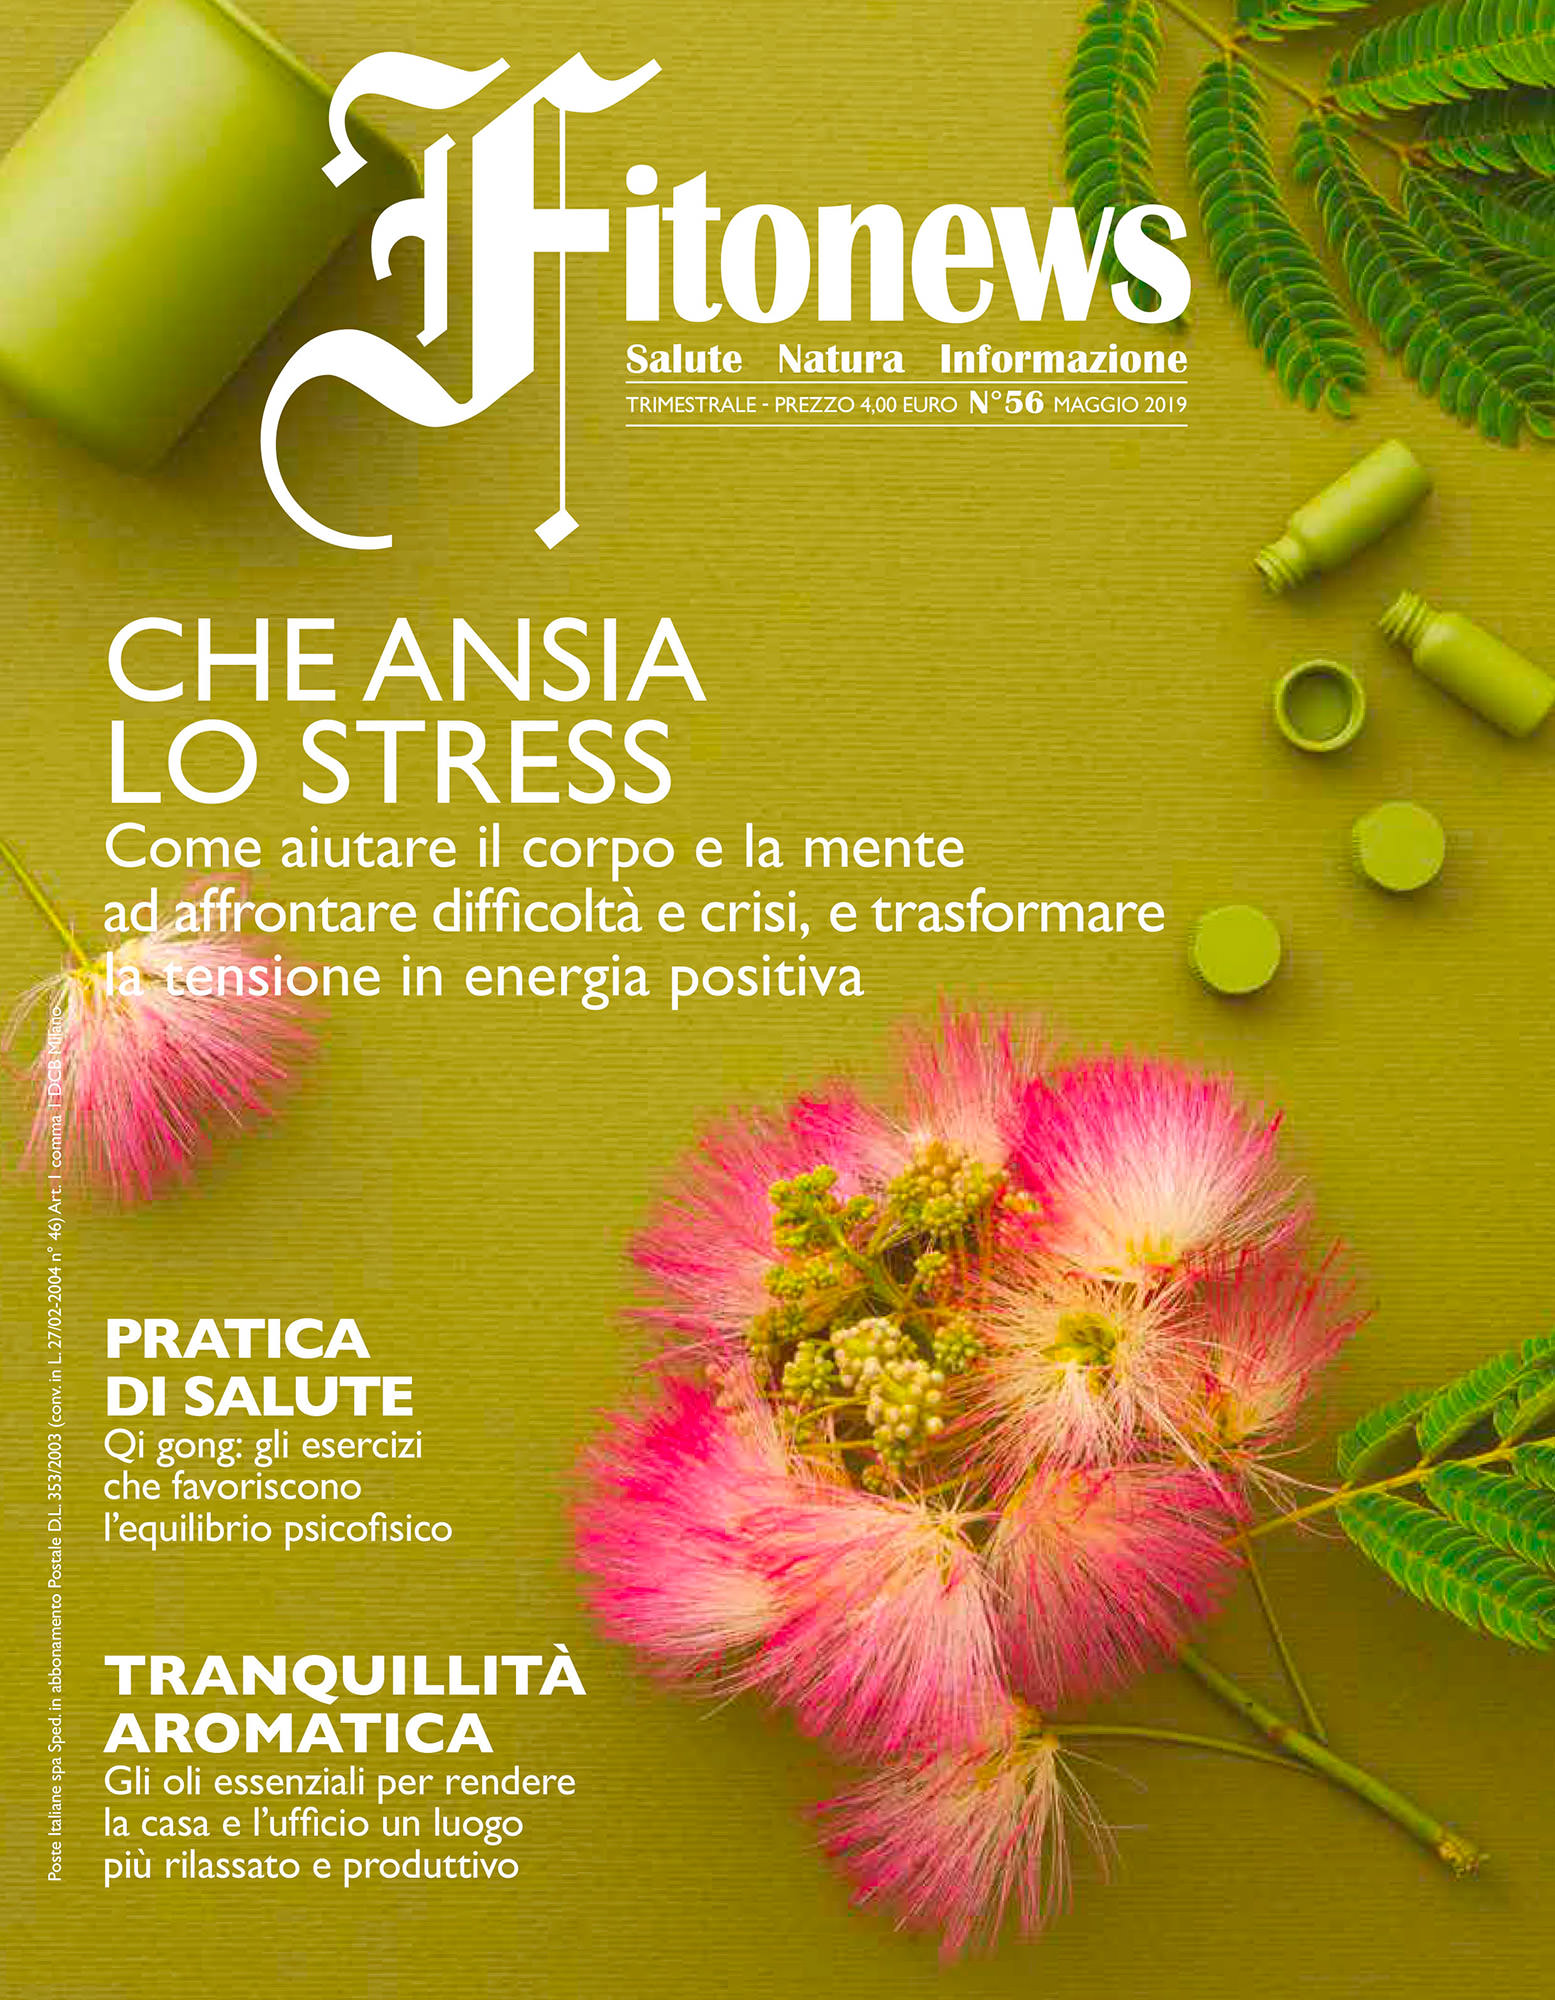 Serenday – Fitonews n°56/2019